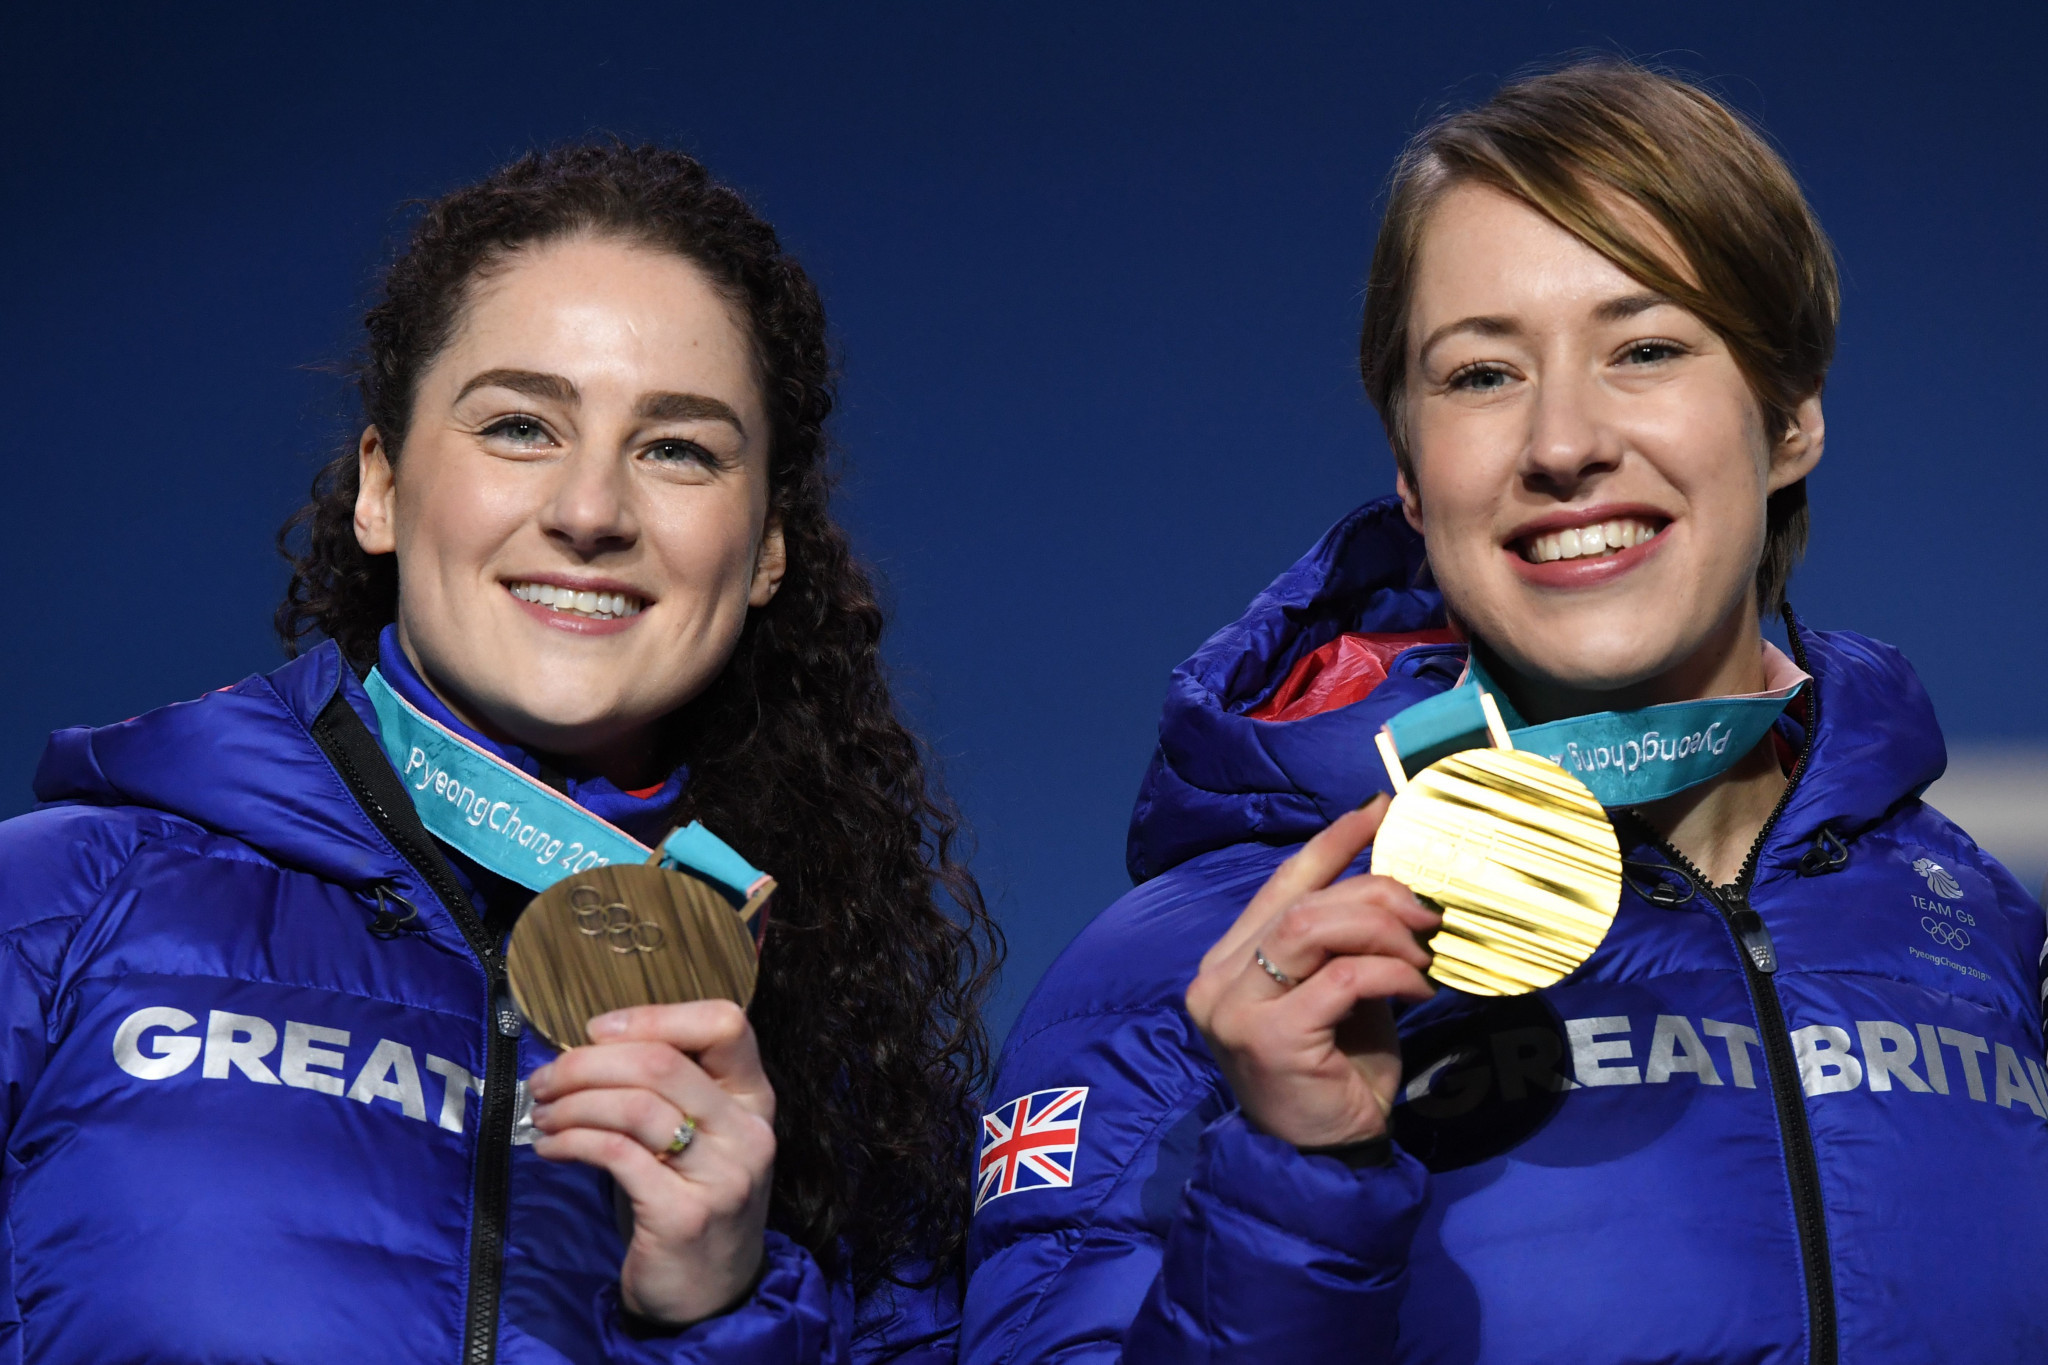 Lizzie Yarnold, right, and Laura Deas clinched gold and bronze respectively in the women's skeleton at Pyeongchang 2018 ©Getty Images